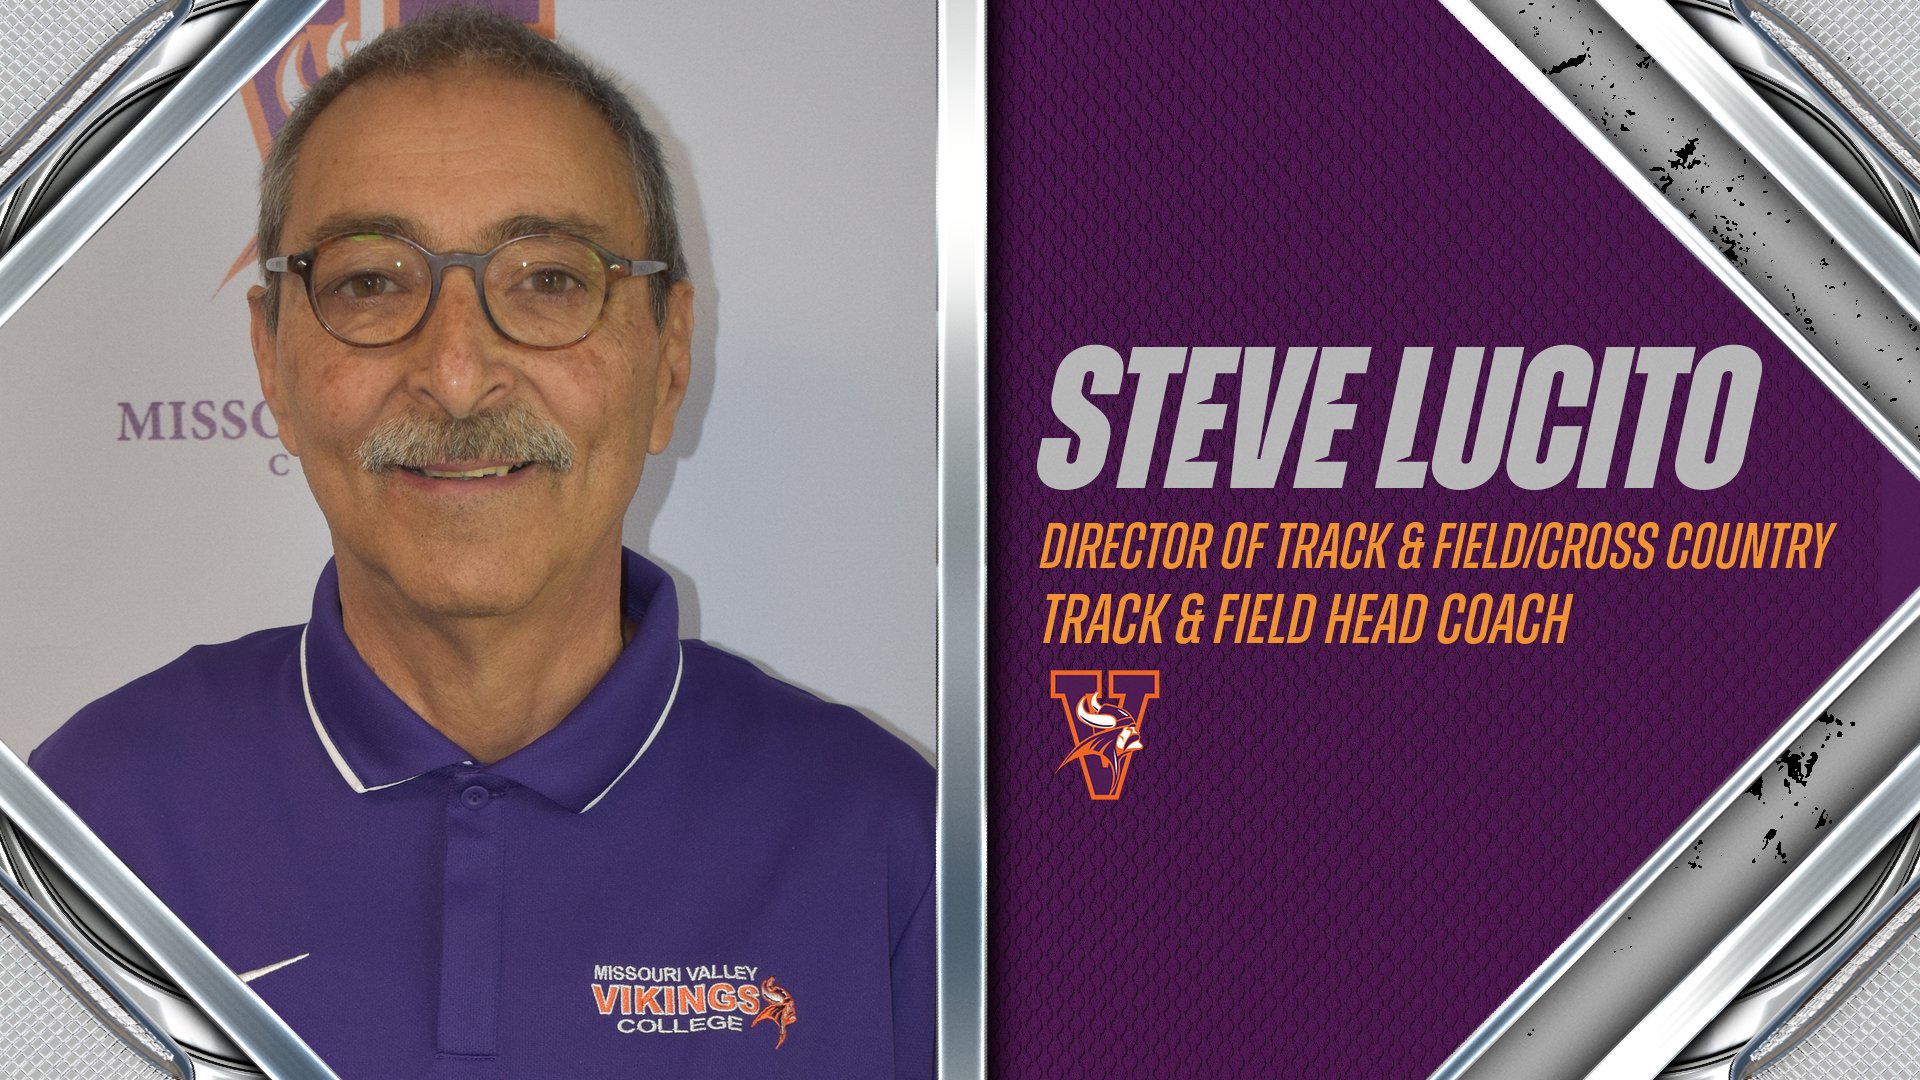 Steve Lucito Hired to Lead Track & Field/Cross Country Programs